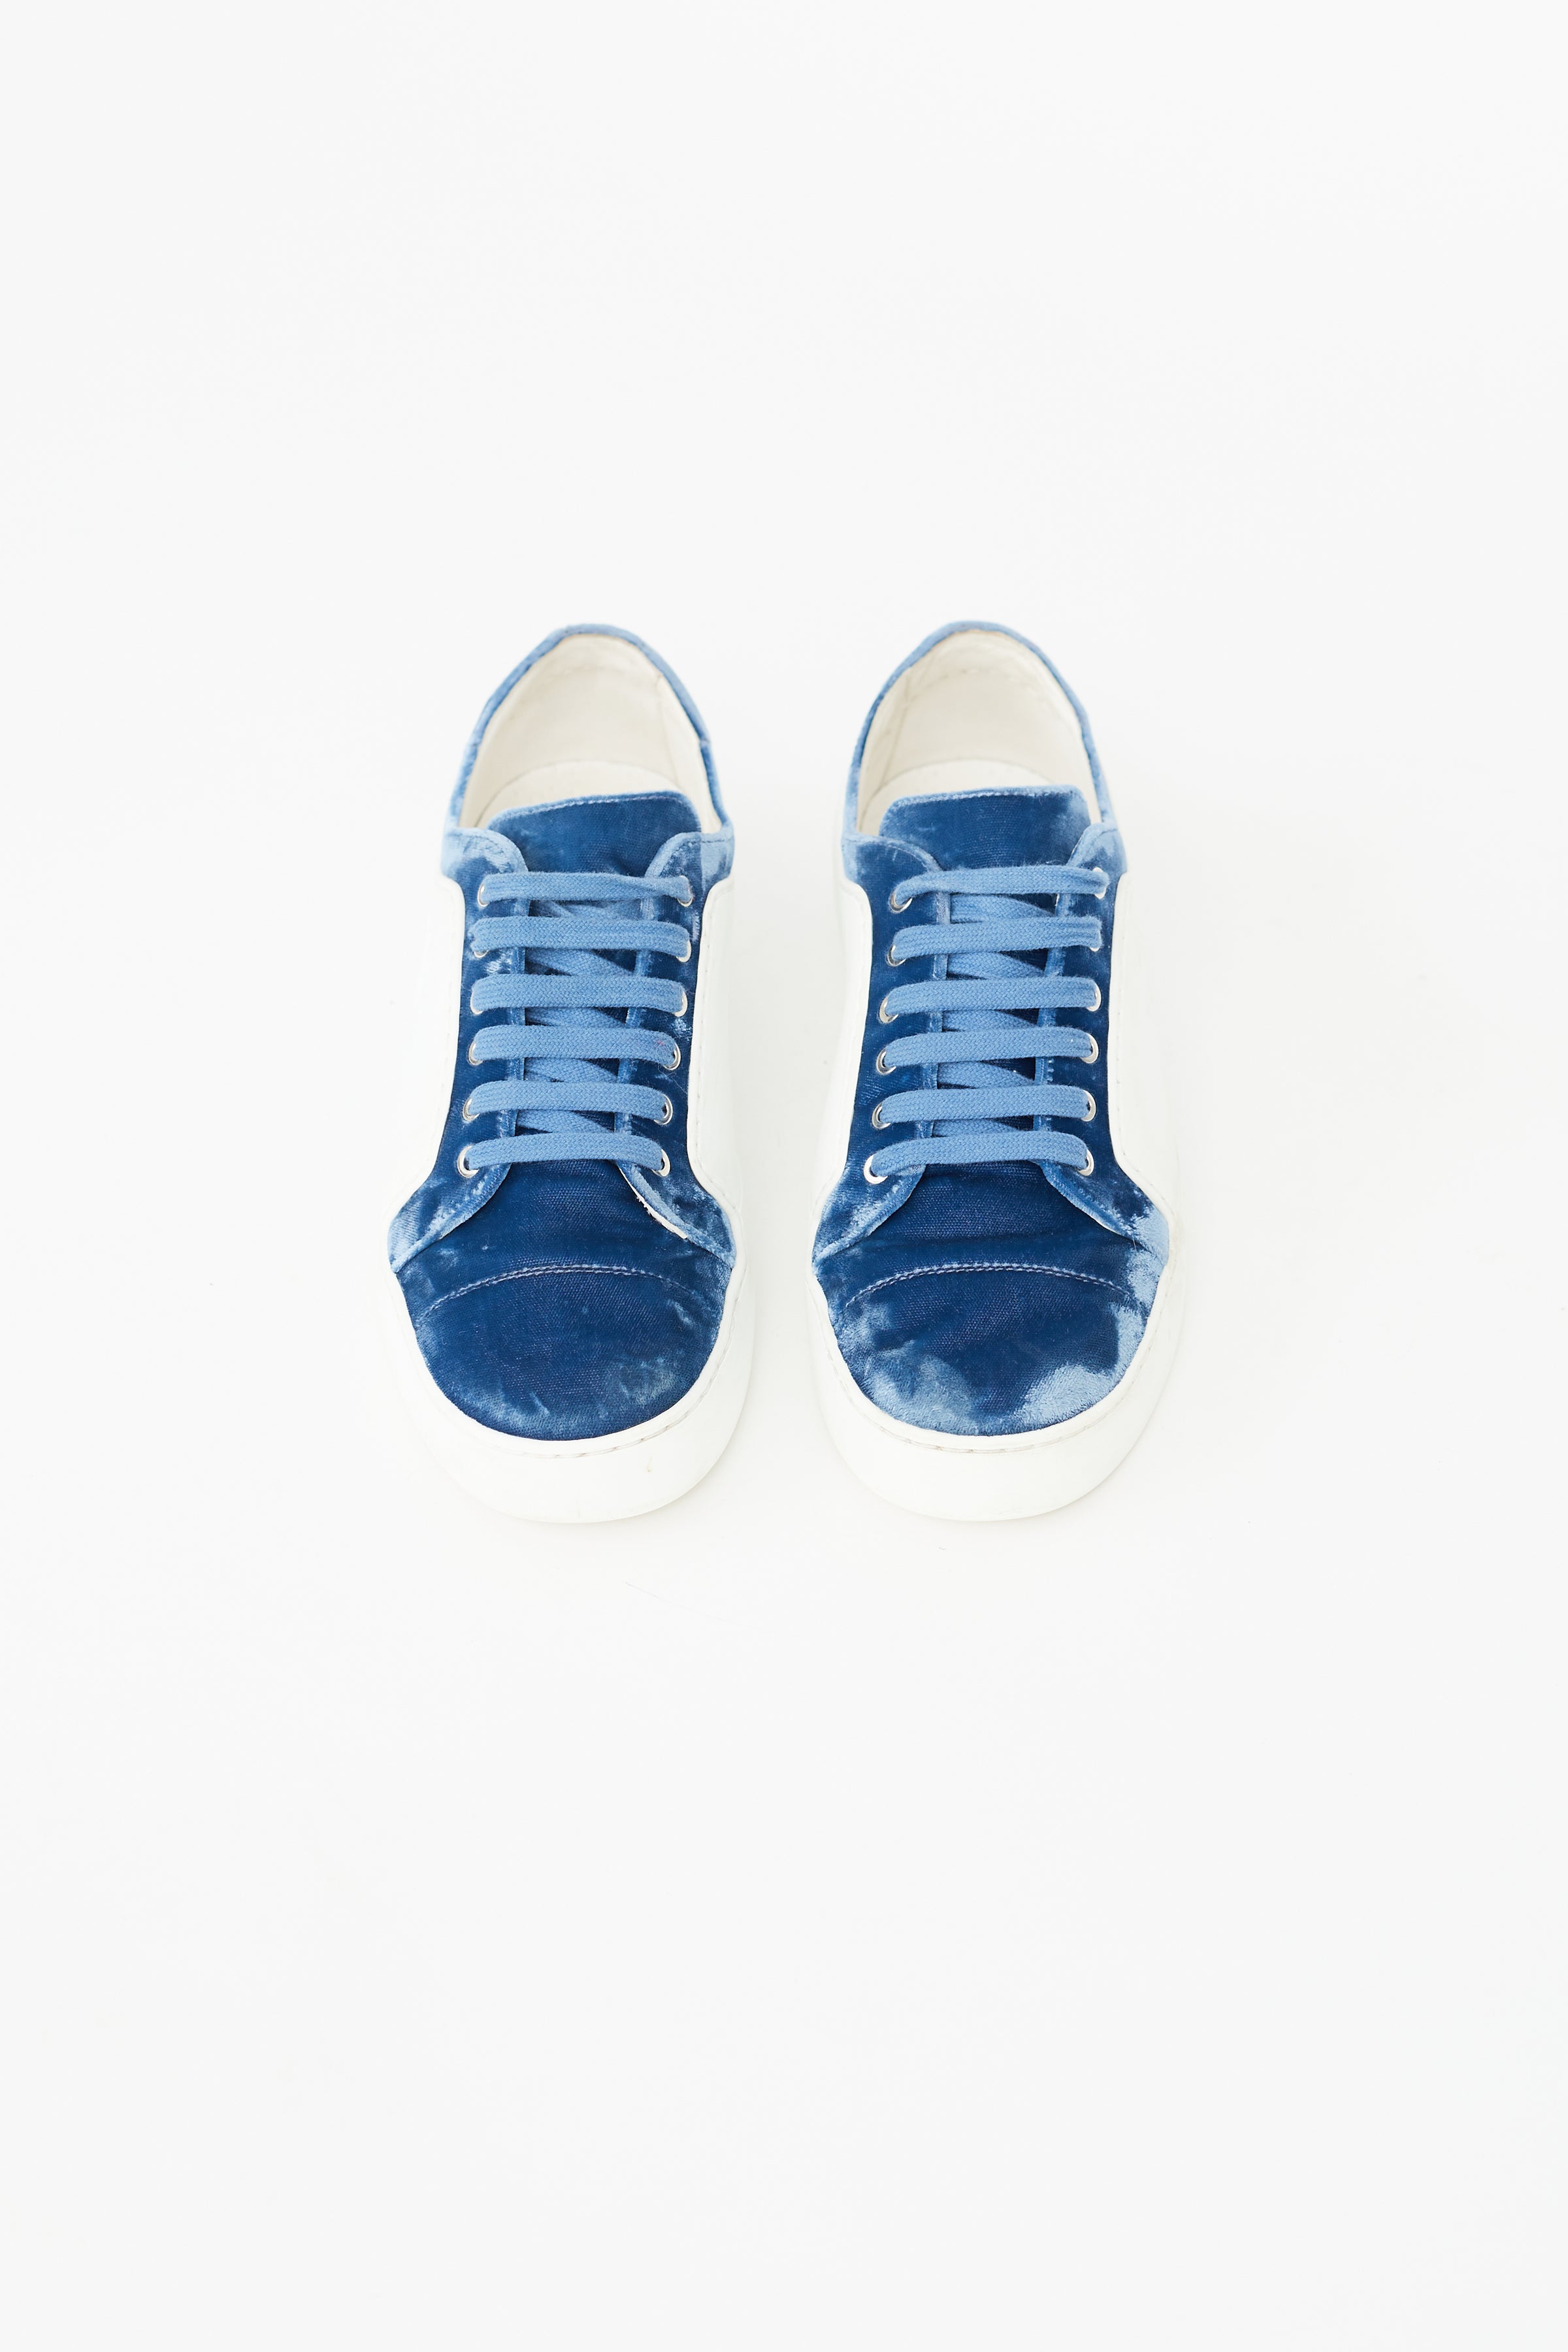 chanel blue and white sneakers men